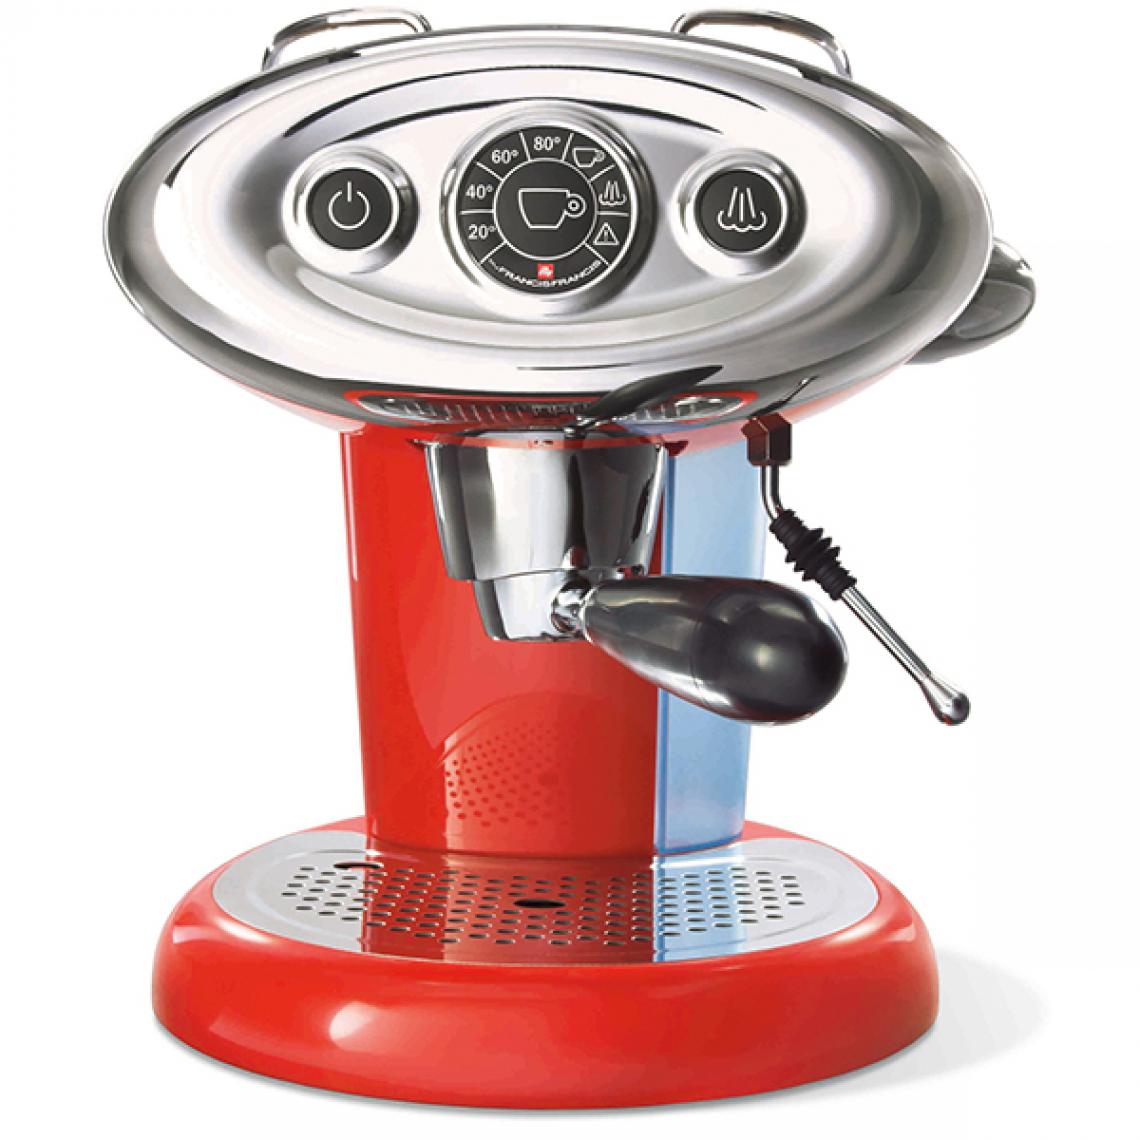 Illy - illy - 6604 - Expresso - Cafetière